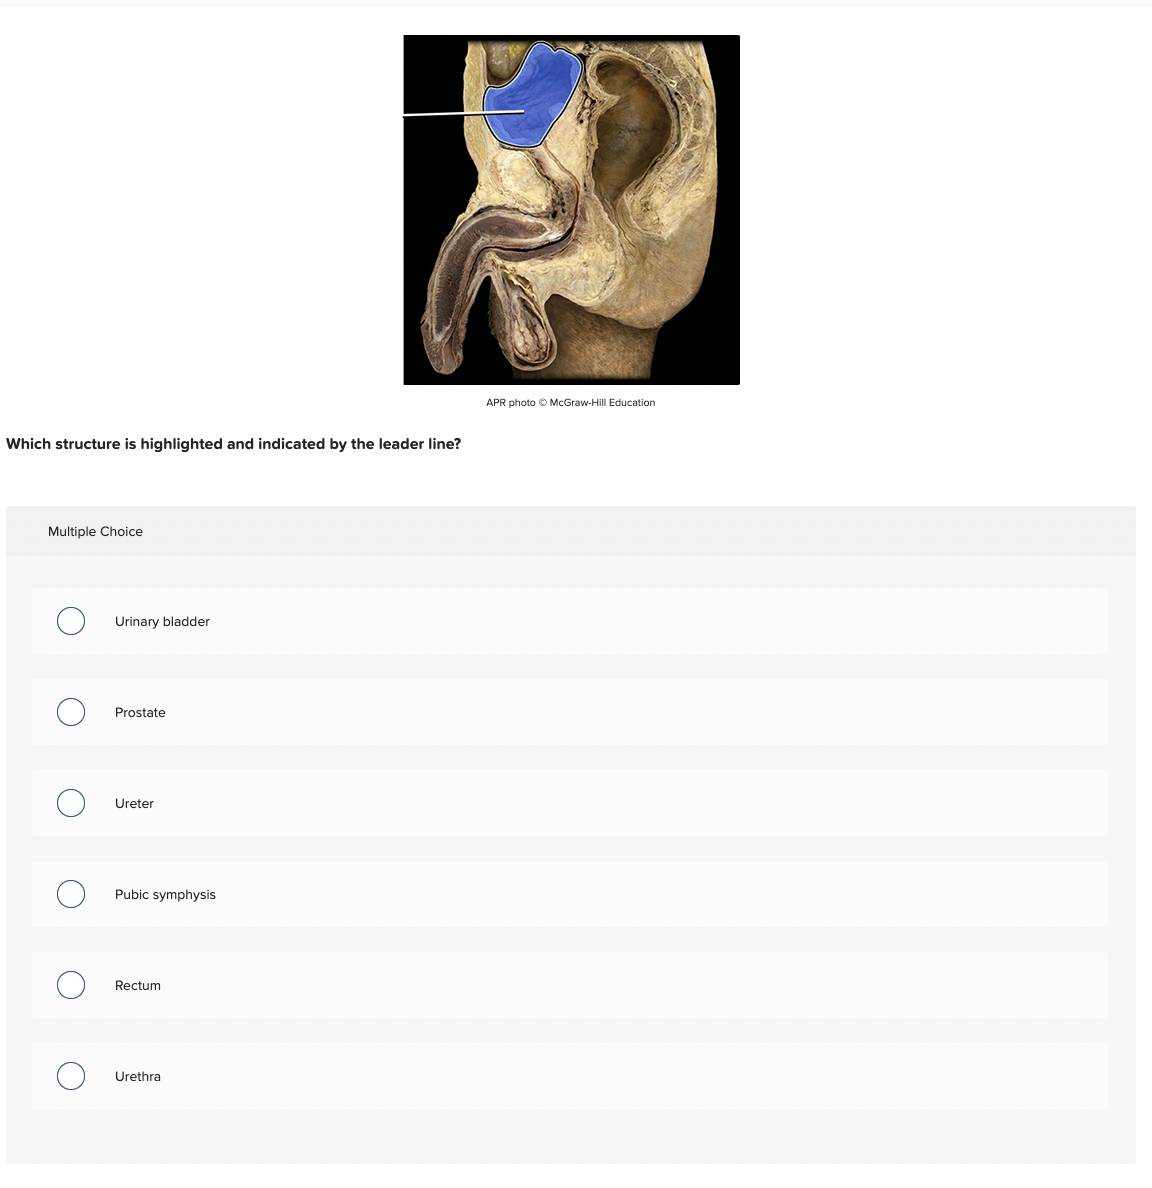 APR photo O McGraw-Hill Education
Which structure is highlighted and indicated by the leader line?
Multiple Choice
Urinary bladder
Prostate
Ureter
Pubic symphysis
Rectum
Urethra
